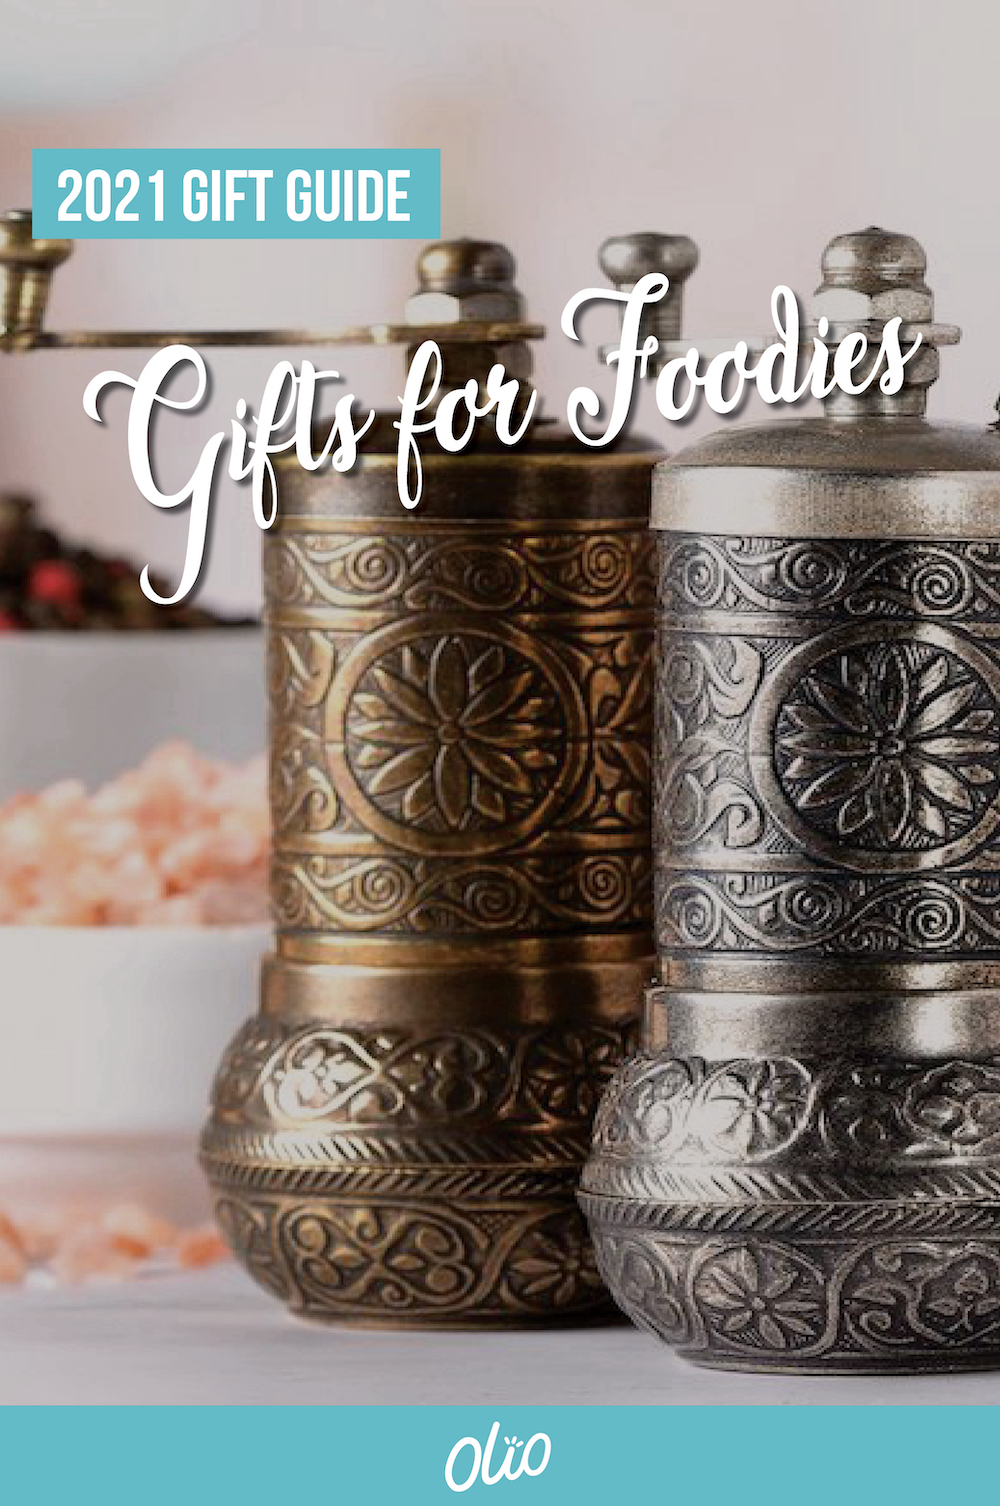 Need an idea for a holiday gift for your favorite lover of good food? These ideas of gifts for foodies include lots of tasty treats as well as kitchen gadgets sure to make their at-home cooking more fun. #giftguide #holidaygiftguide #foodiegifts